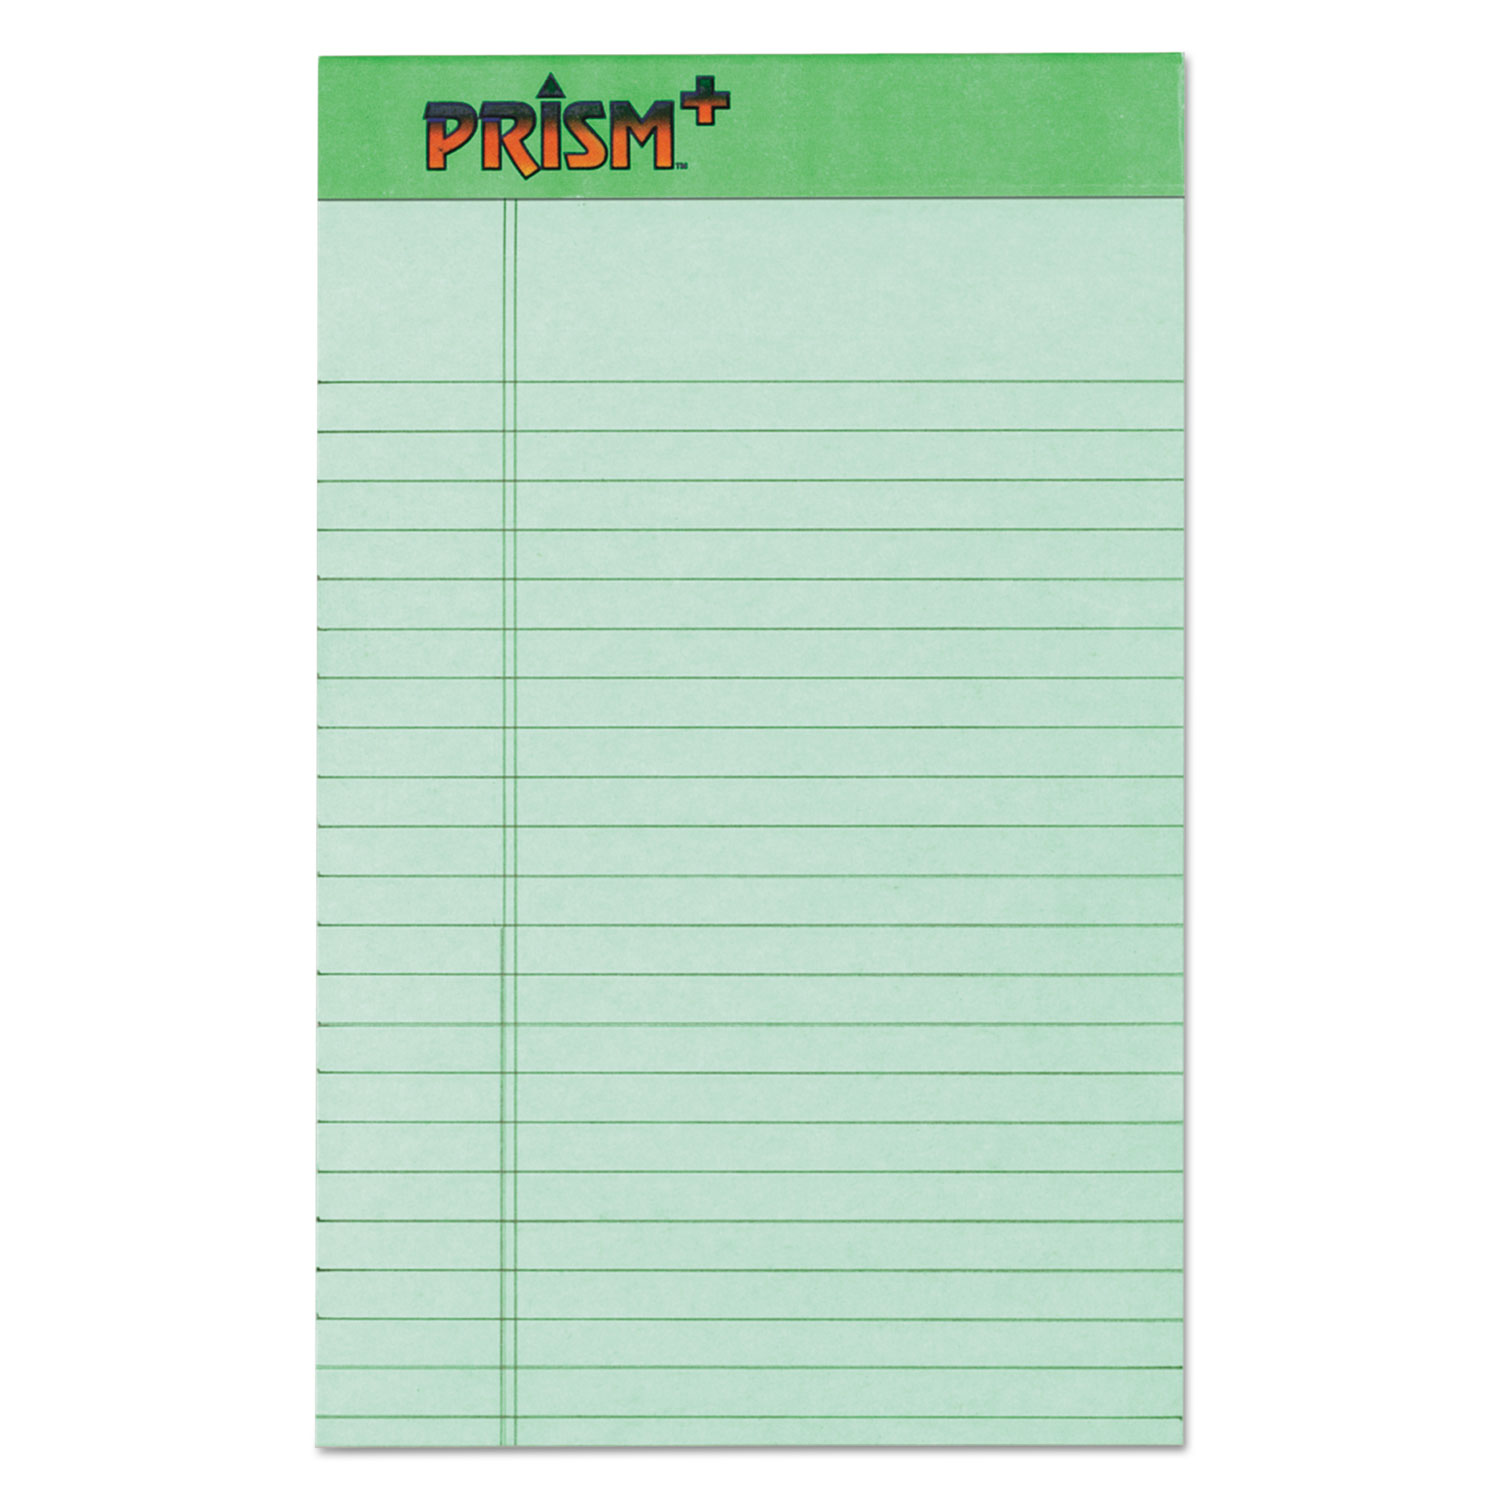  TOPS 63090 Prism + Writing Pads, Narrow Rule, 5 x 8, Pastel Green, 50 Sheets, 12/Pack (TOP63090) 